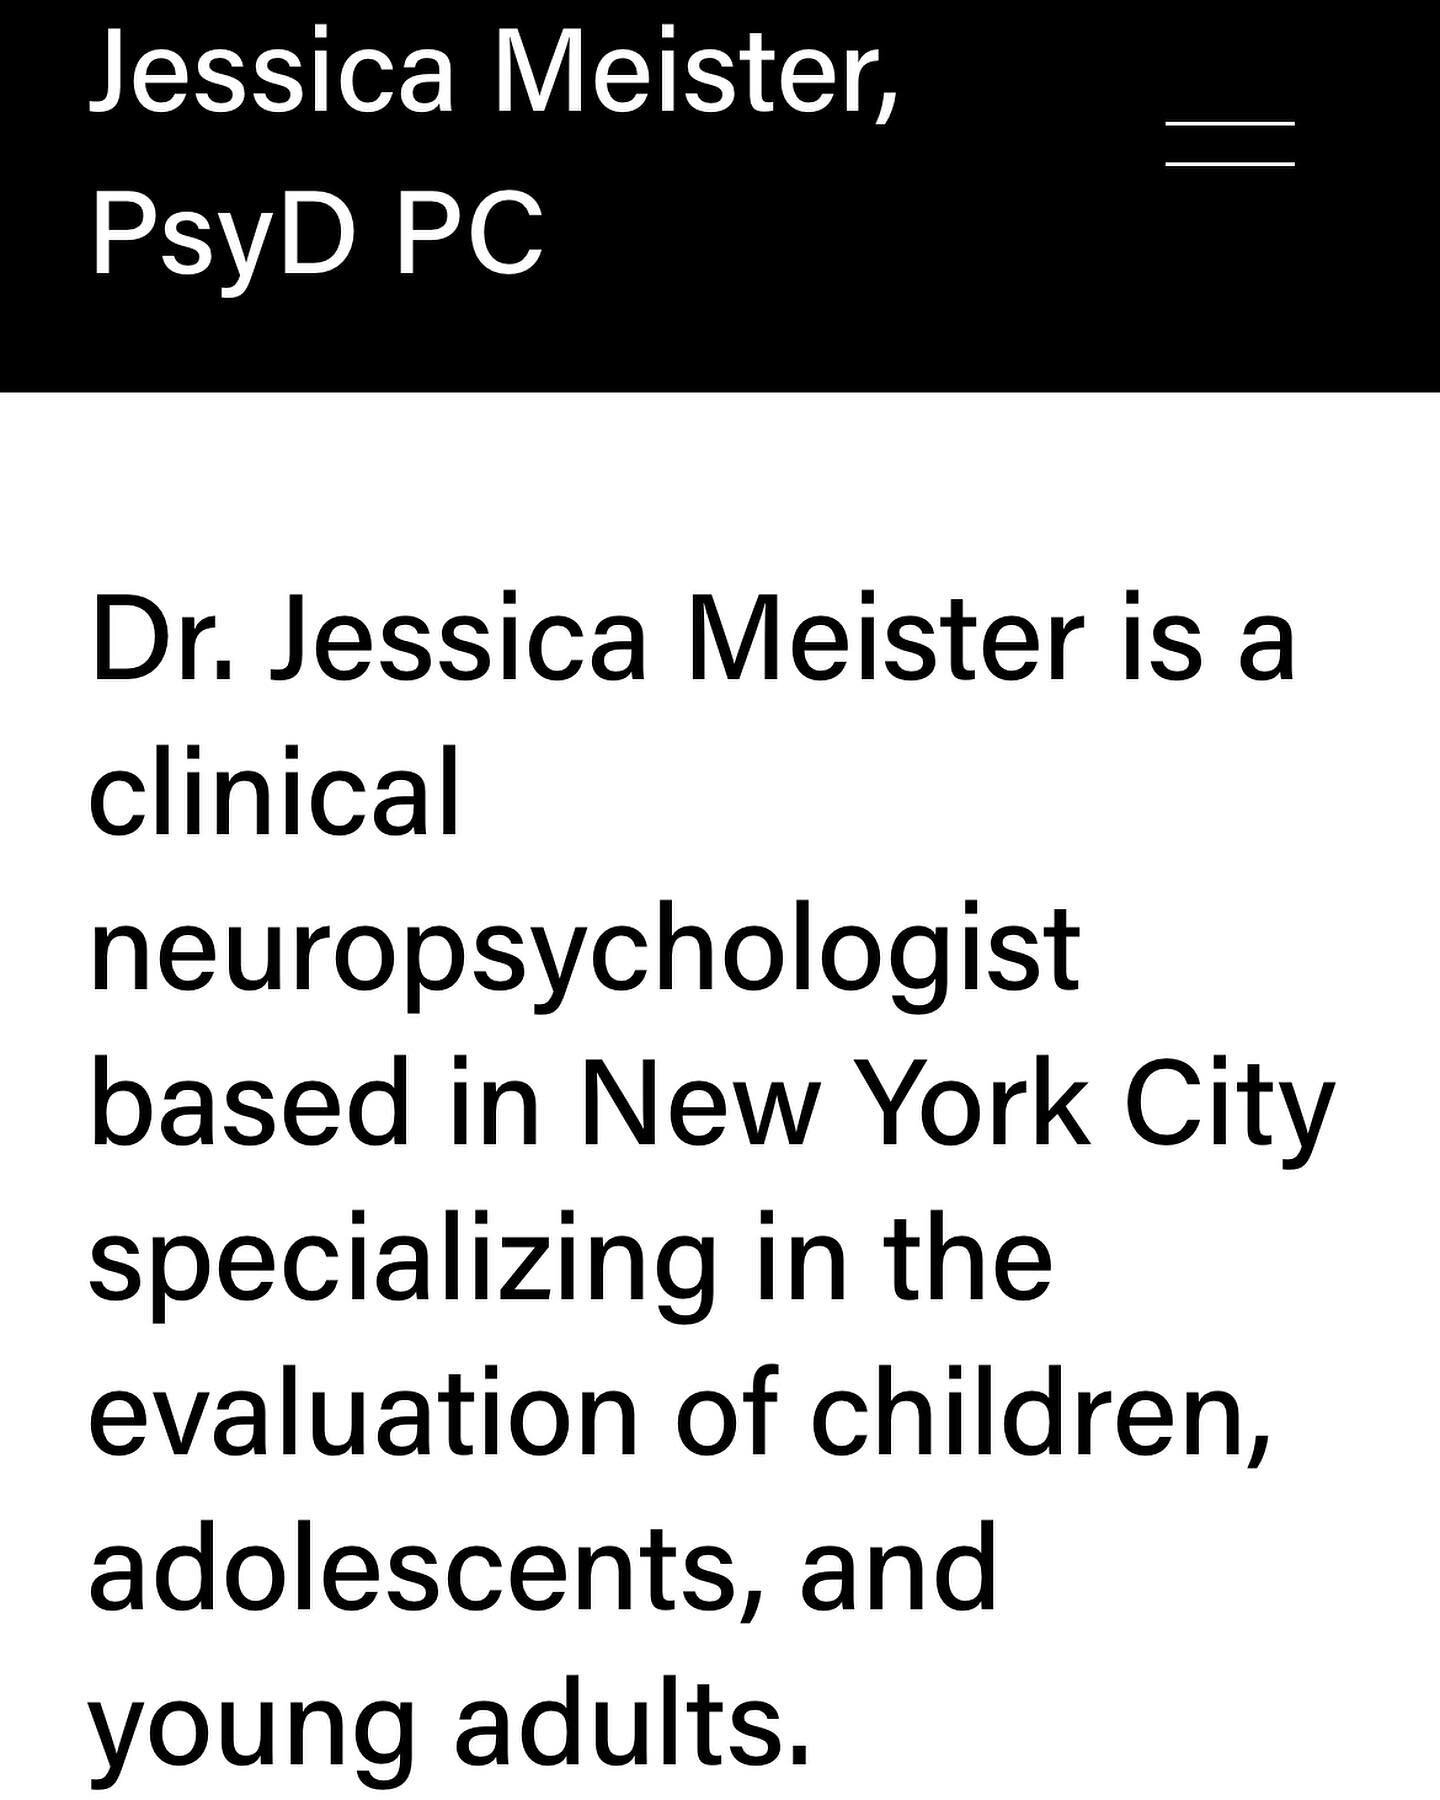 In case you missed it&hellip;we finally launched our website! Check it out! Thank you @shanadickstein !

#neuropsychologist #nyc #childpsychologist #adolescentpsychologist #education #learningdisorders #adhd #autismspectrumdisorder #neurodevelopmenta